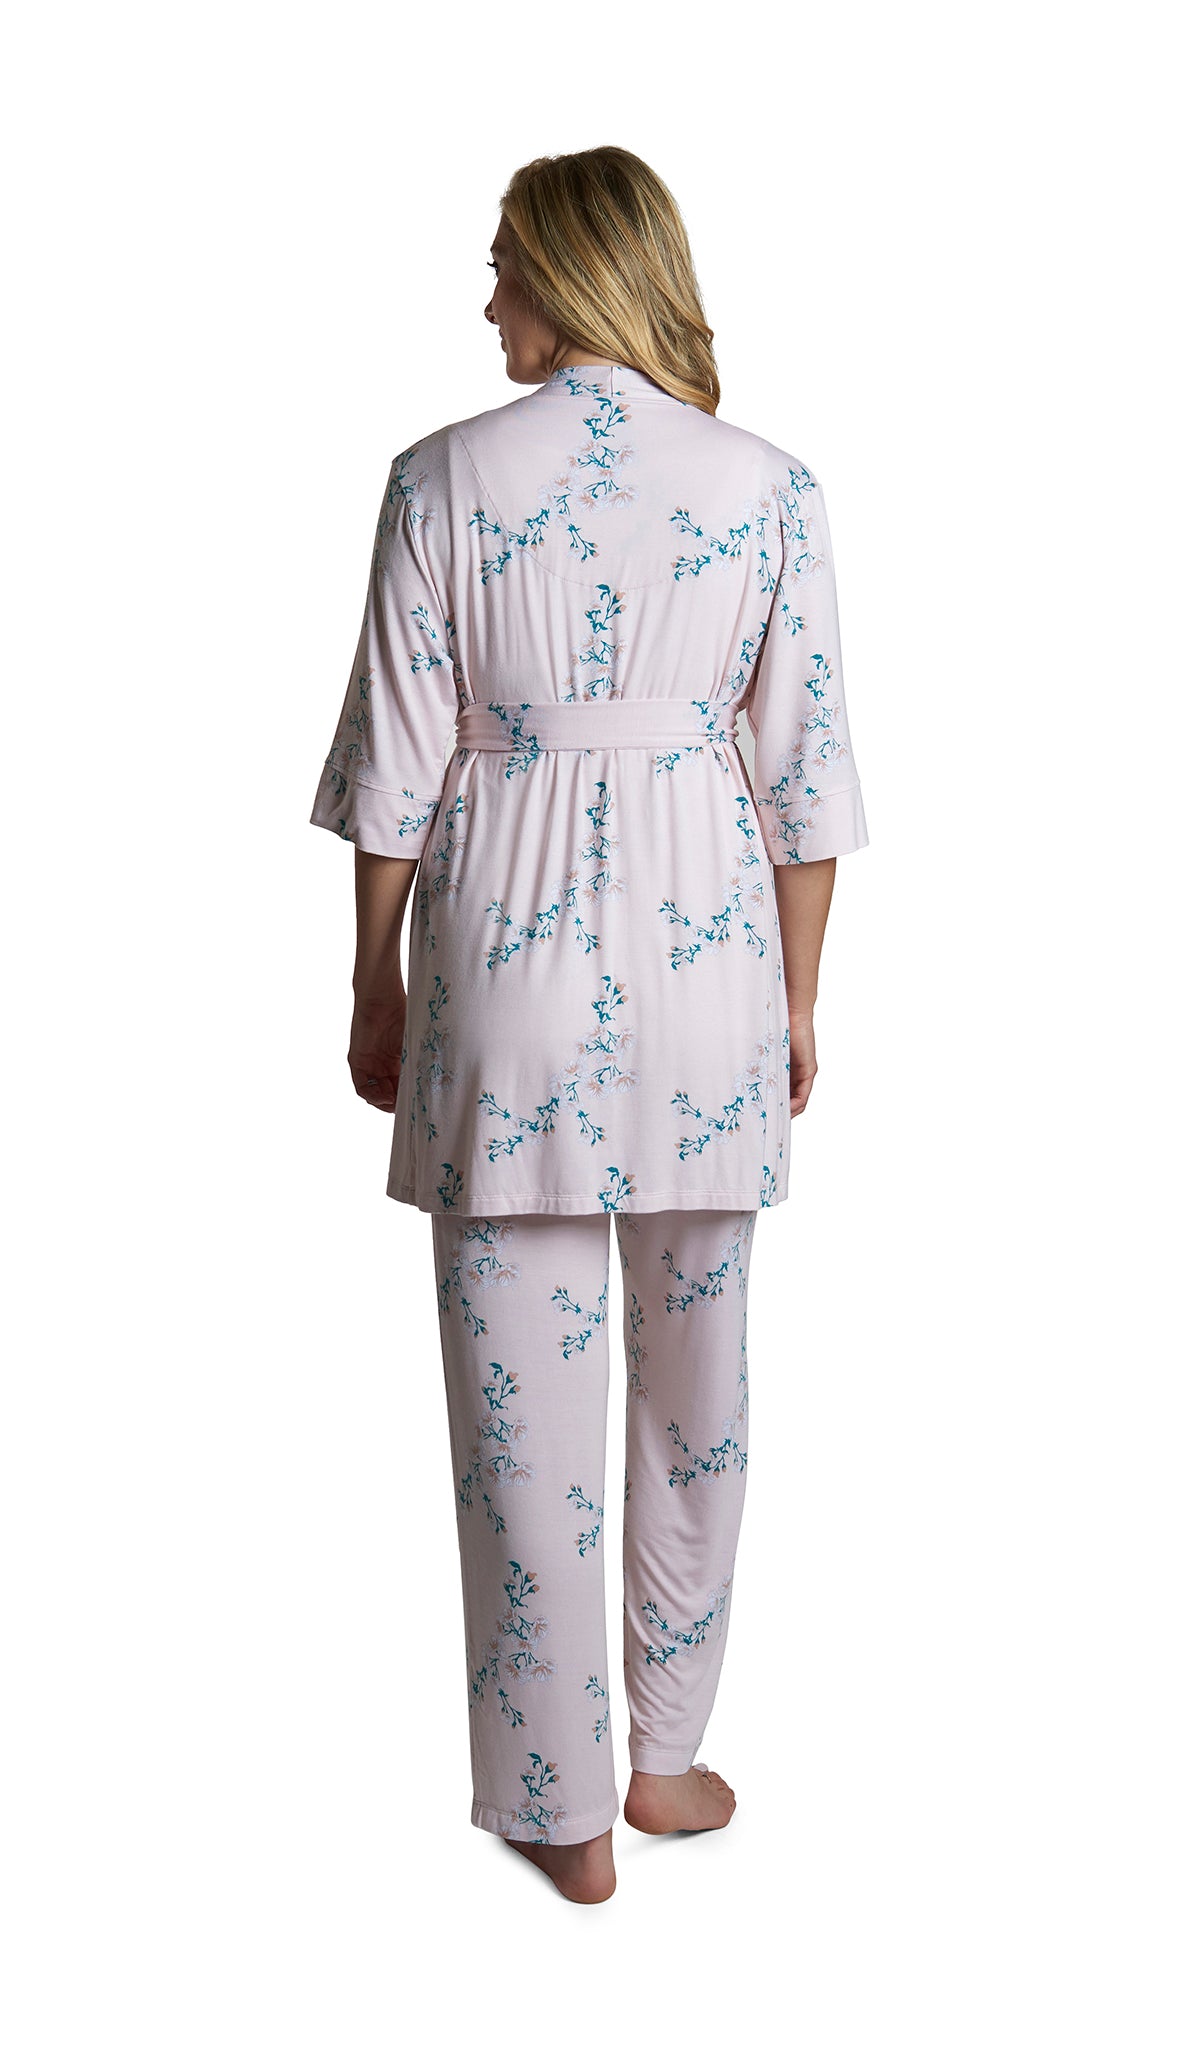 Lily Analise 5-Piece Set, back shot of woman wearing robe and pant.